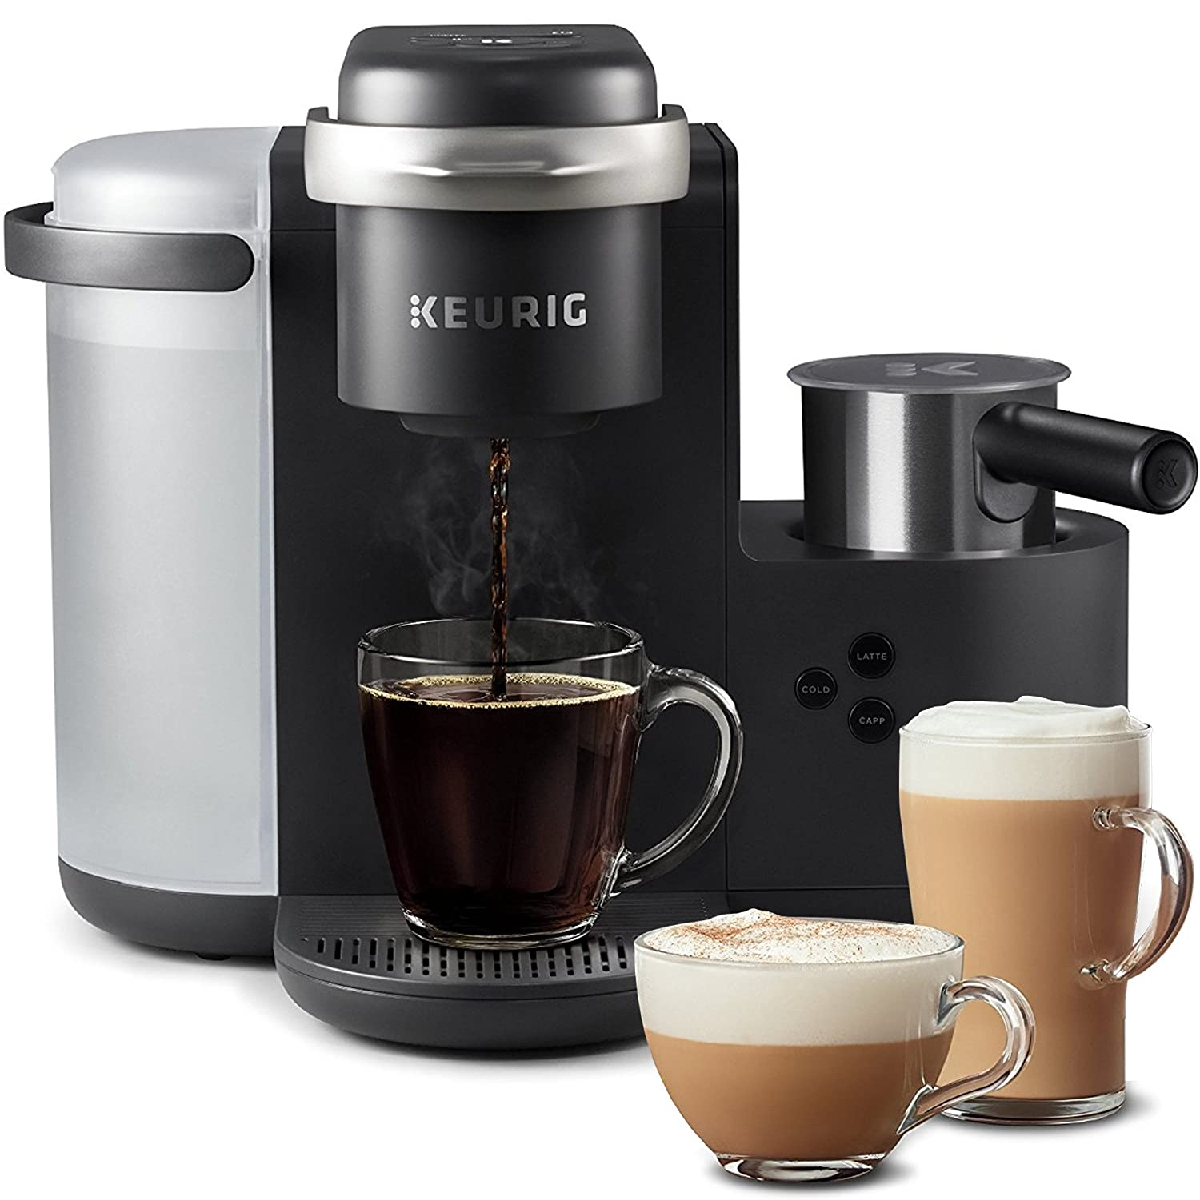 Keurig K-Café for Lattes and Cappuccinos